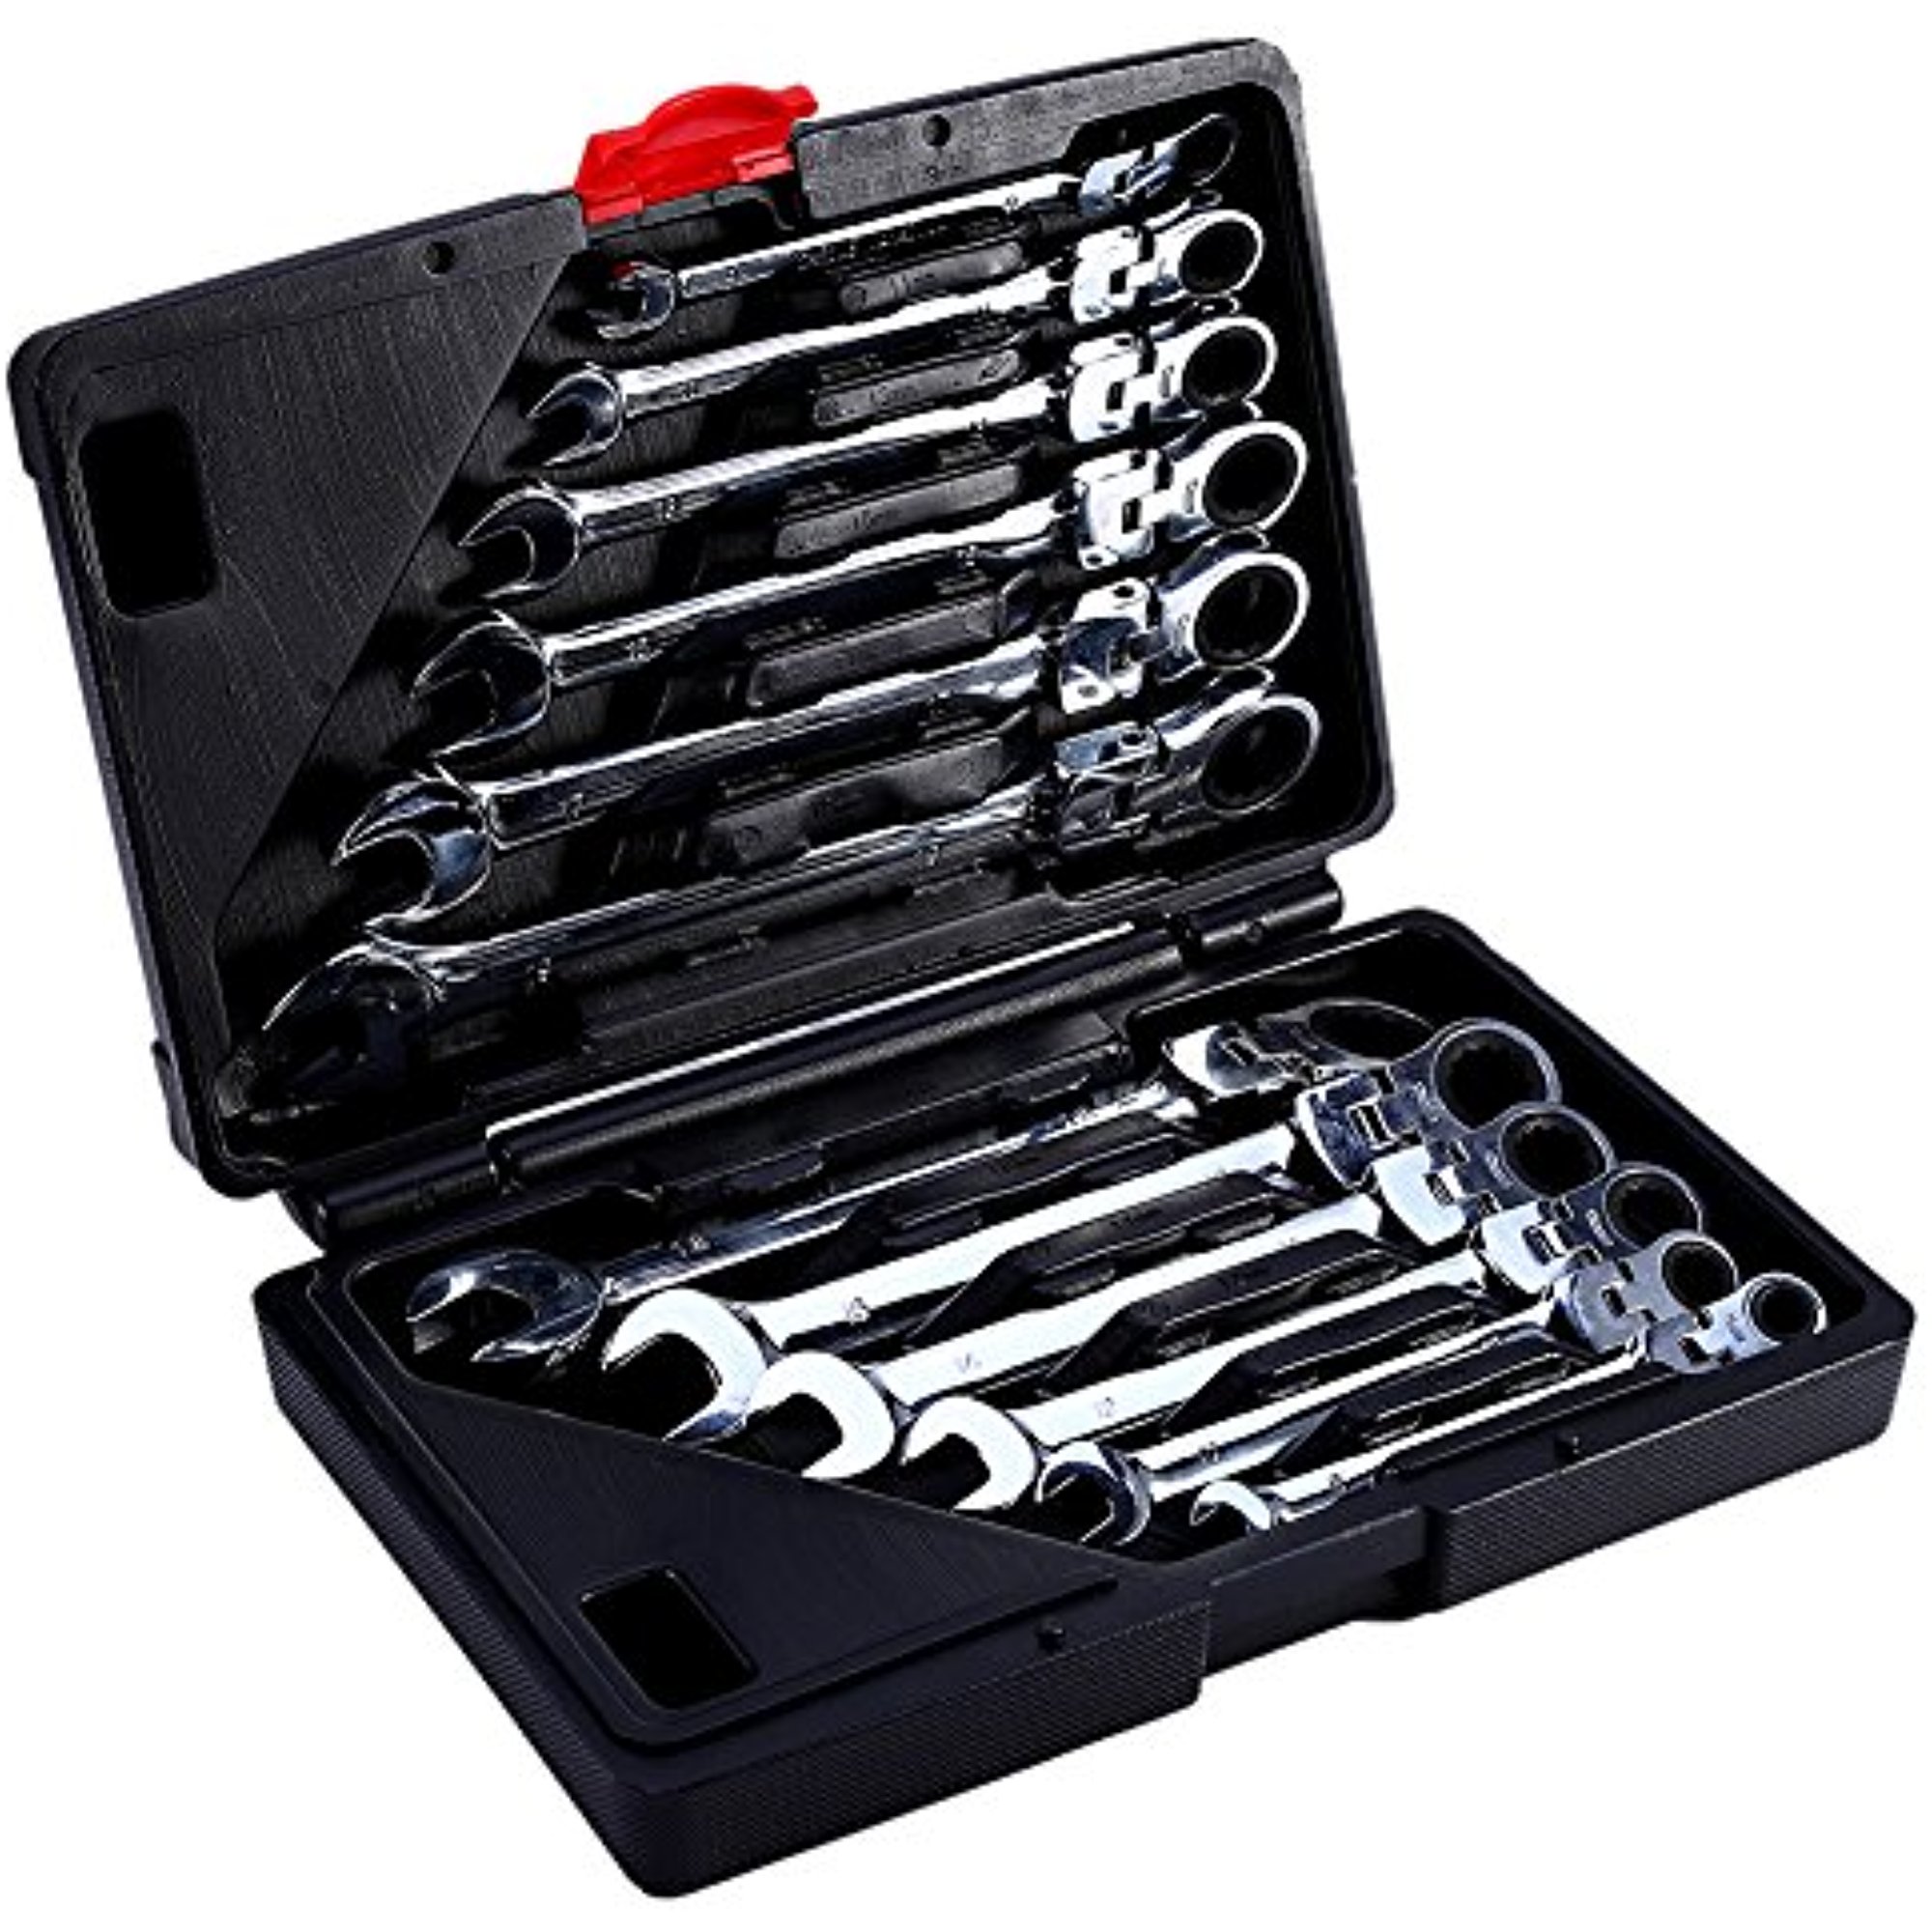 FAGINEY 12-Piece 8-19mm Metric Flex-Head Ratcheting Wrench Set, Professional Superior Quality Chrome Vanadium Steel Combination Ended Standard Kit with Portable Tool Case - image 2 of 7